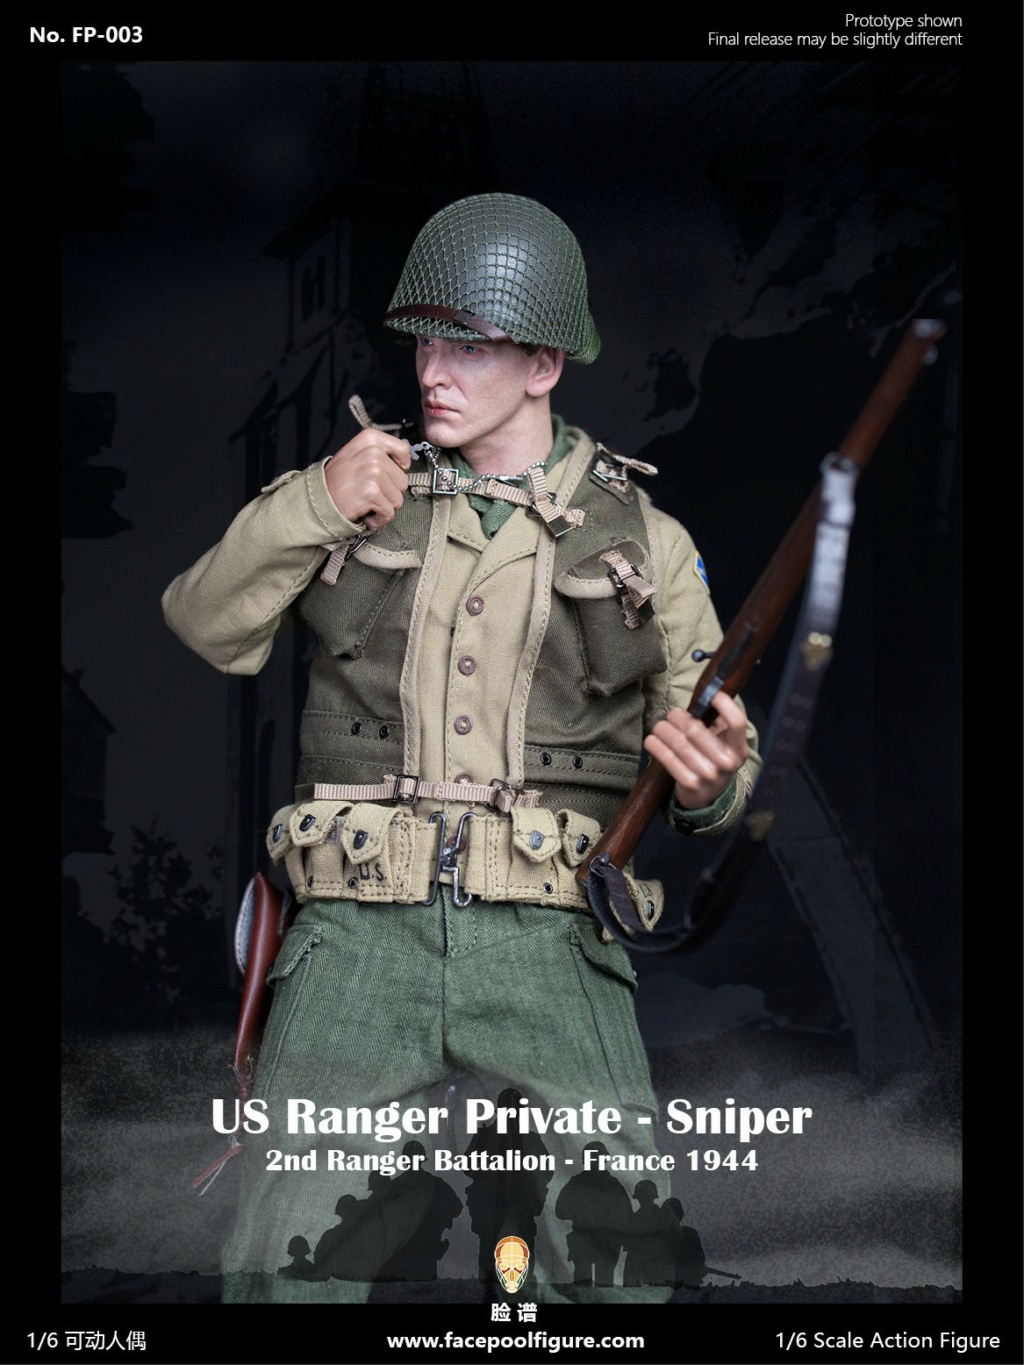 WWII - NEW PRODUCT: Facepool: 1/6 WWII Ranger Sniper FP003-Double-headed sculpture + bell tower platform  09173710